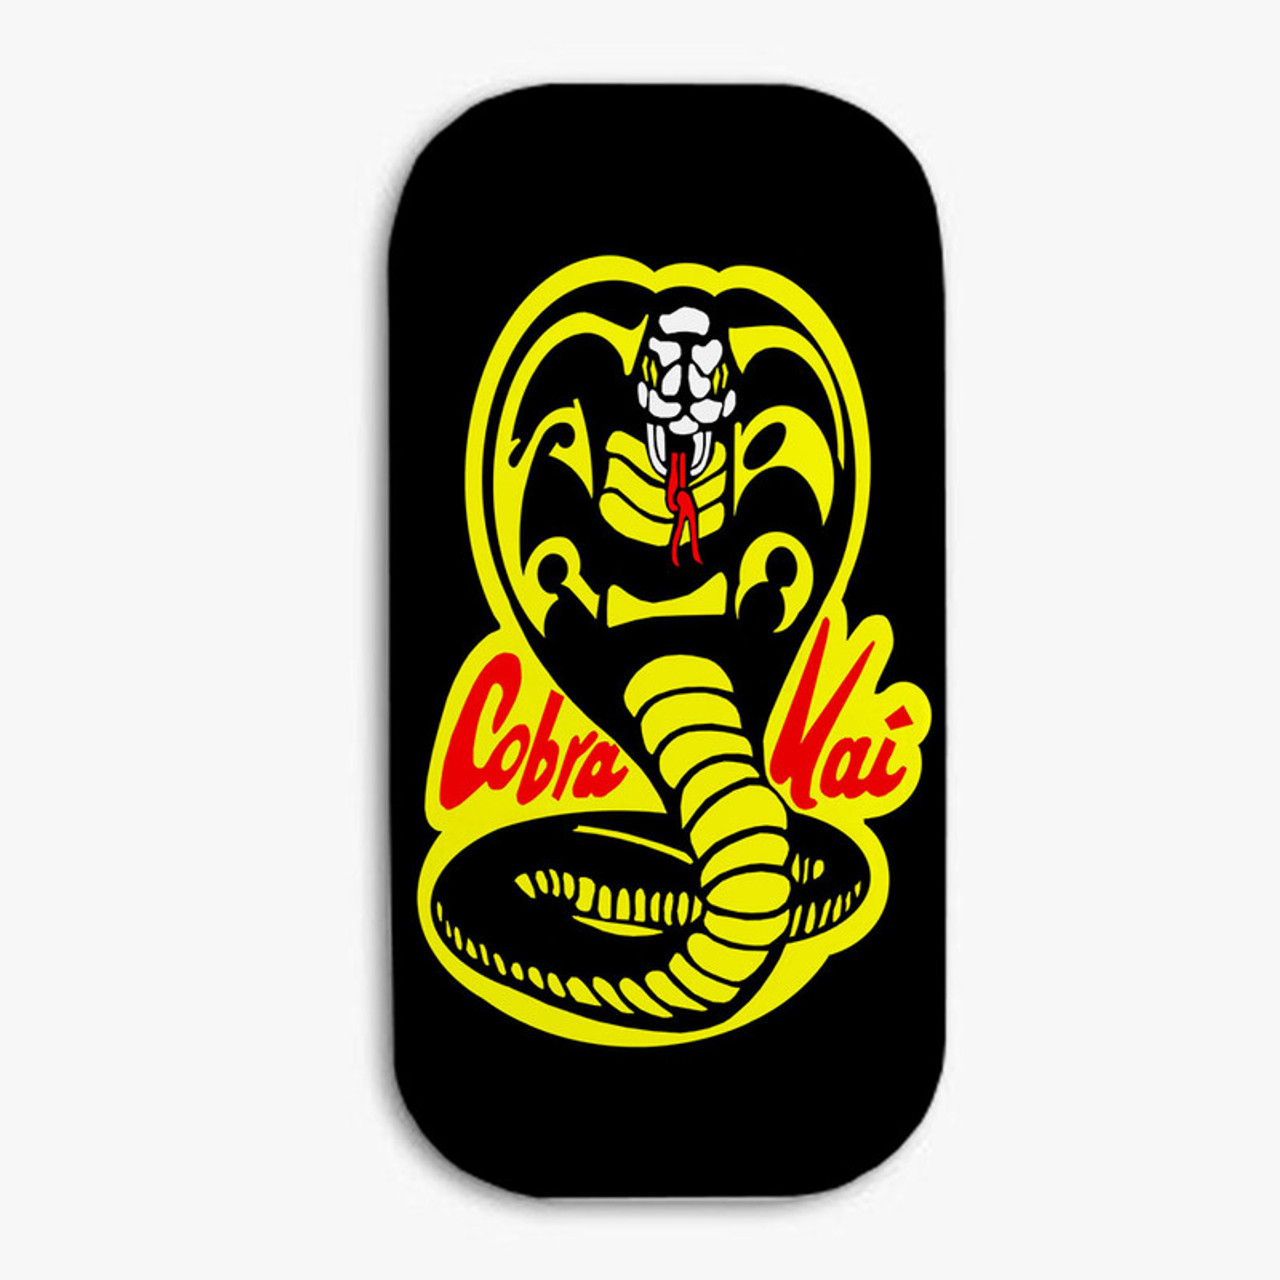 Pastele Cobra Kai Season 5 Custom PopSockets Awesome Personalized Phone  Grip Holder Pop Up Stand Out